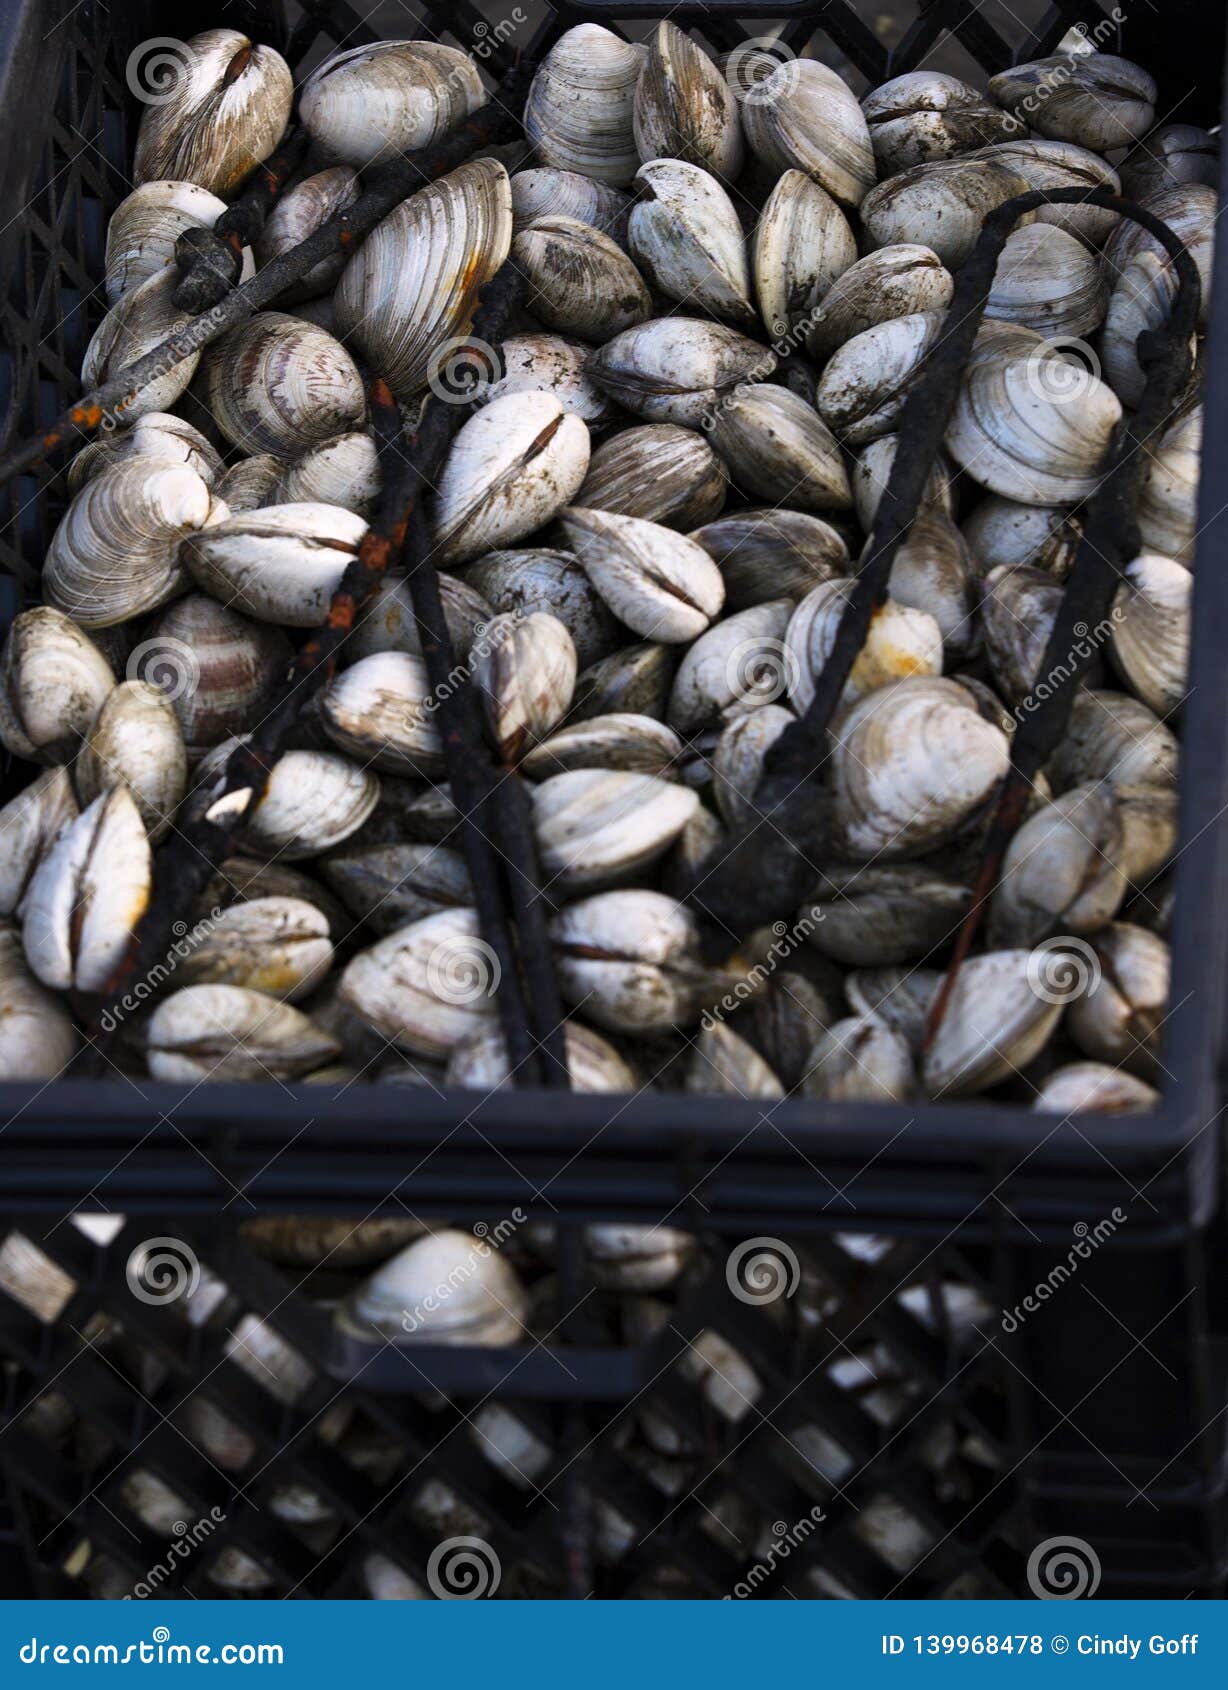 Oysters in a Crate in Wellfleet MA on Cape Cod Stock Photo - Image of